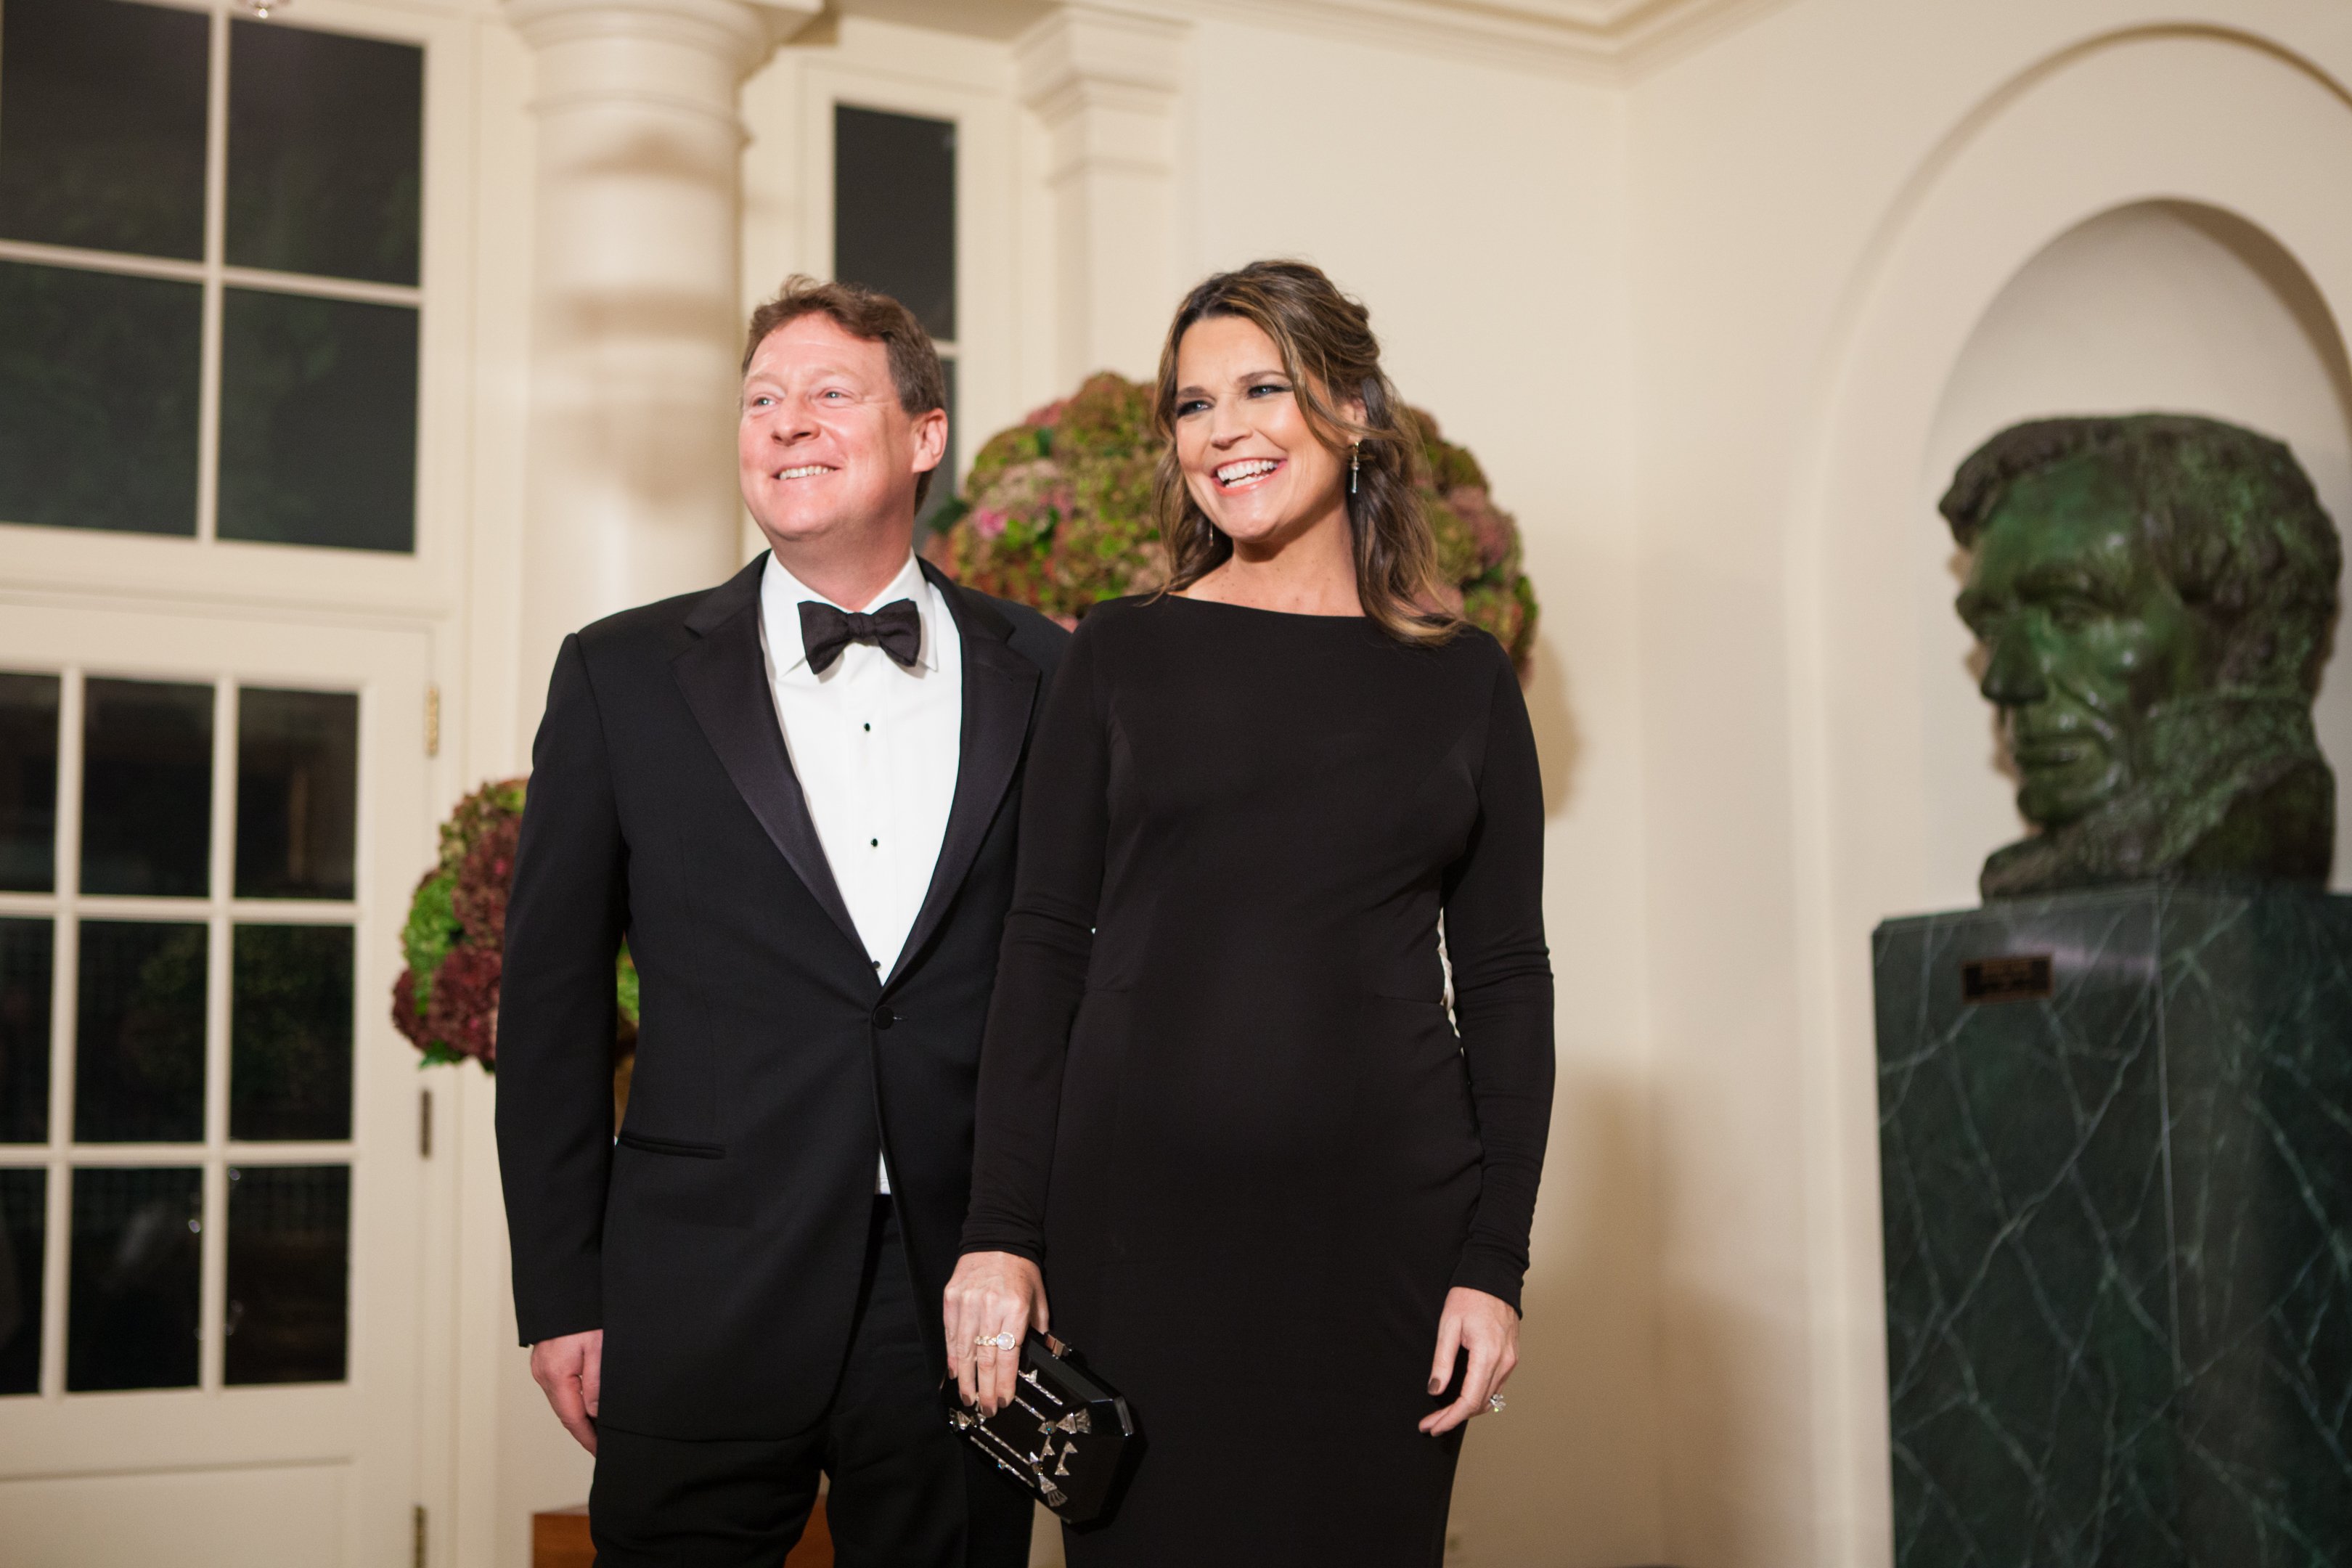 Savannah Guthrie and her husband Michael Feldman, arrive at the White House in Washington, DC, USA on 18 October 2016 | Photo: Getty Images